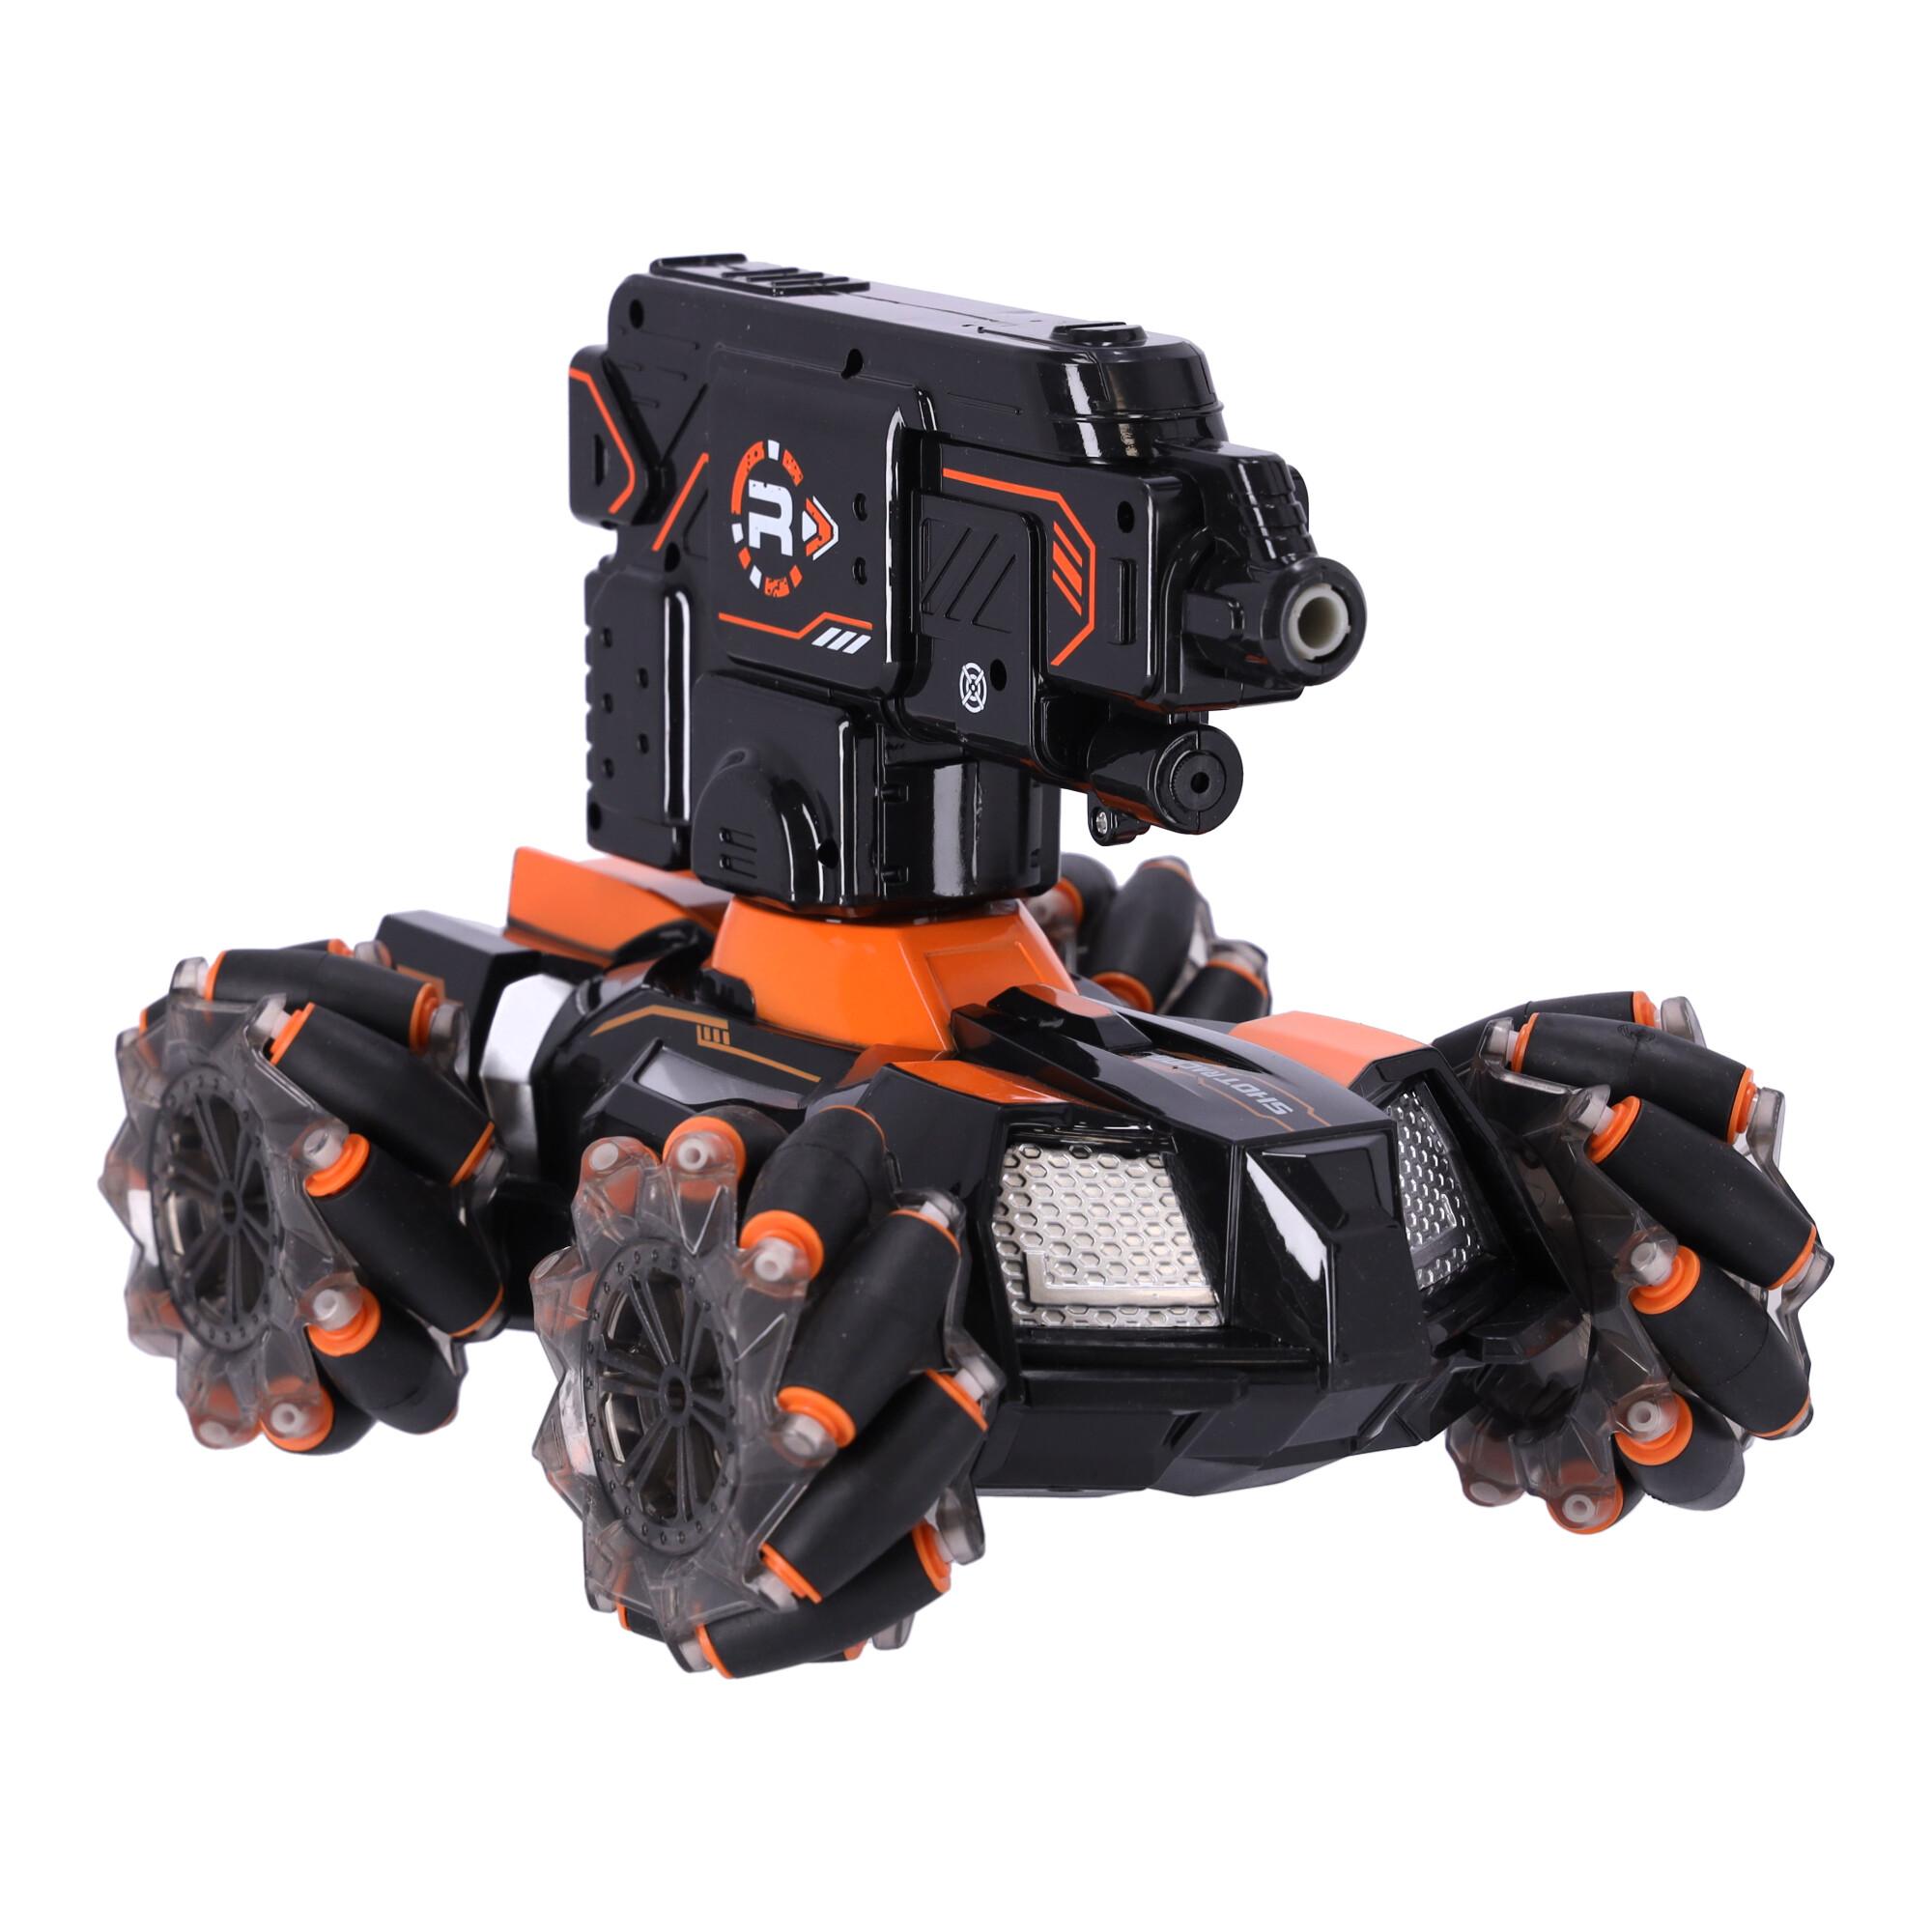 Remote controlled car with shooting water balls UKC029 - orange